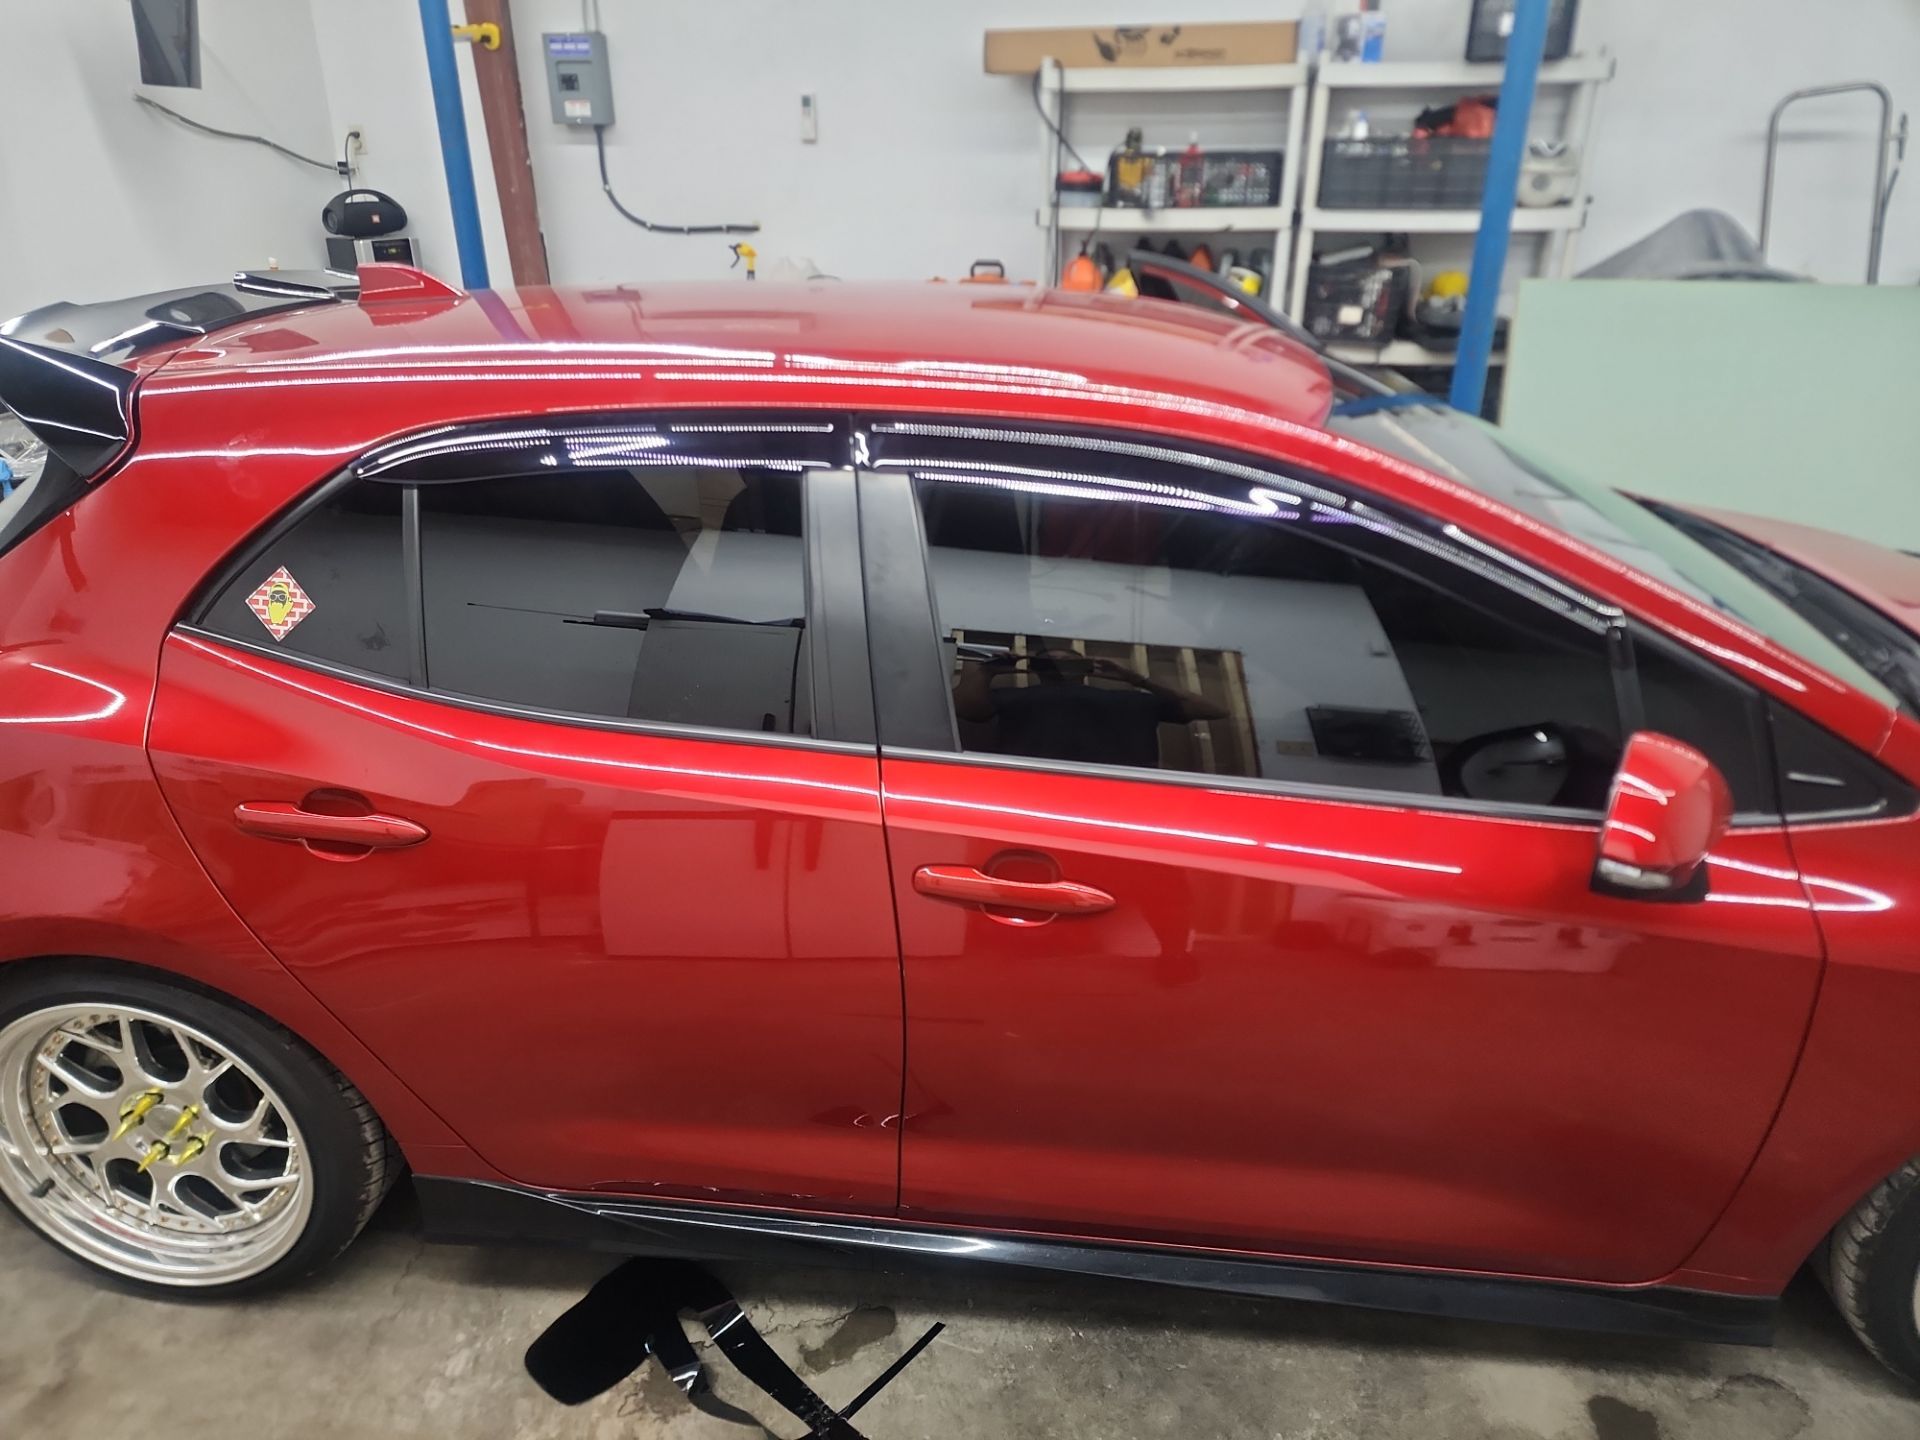 a bright red hatchback car is shown the windows have been freshly tinted to reduce glare and improve privacy there appears to be a high quality tinting film applied to all side windows of the vehicle the work looks precise and professionally done reflecting the expertise of t's window tinting in pensacola fl